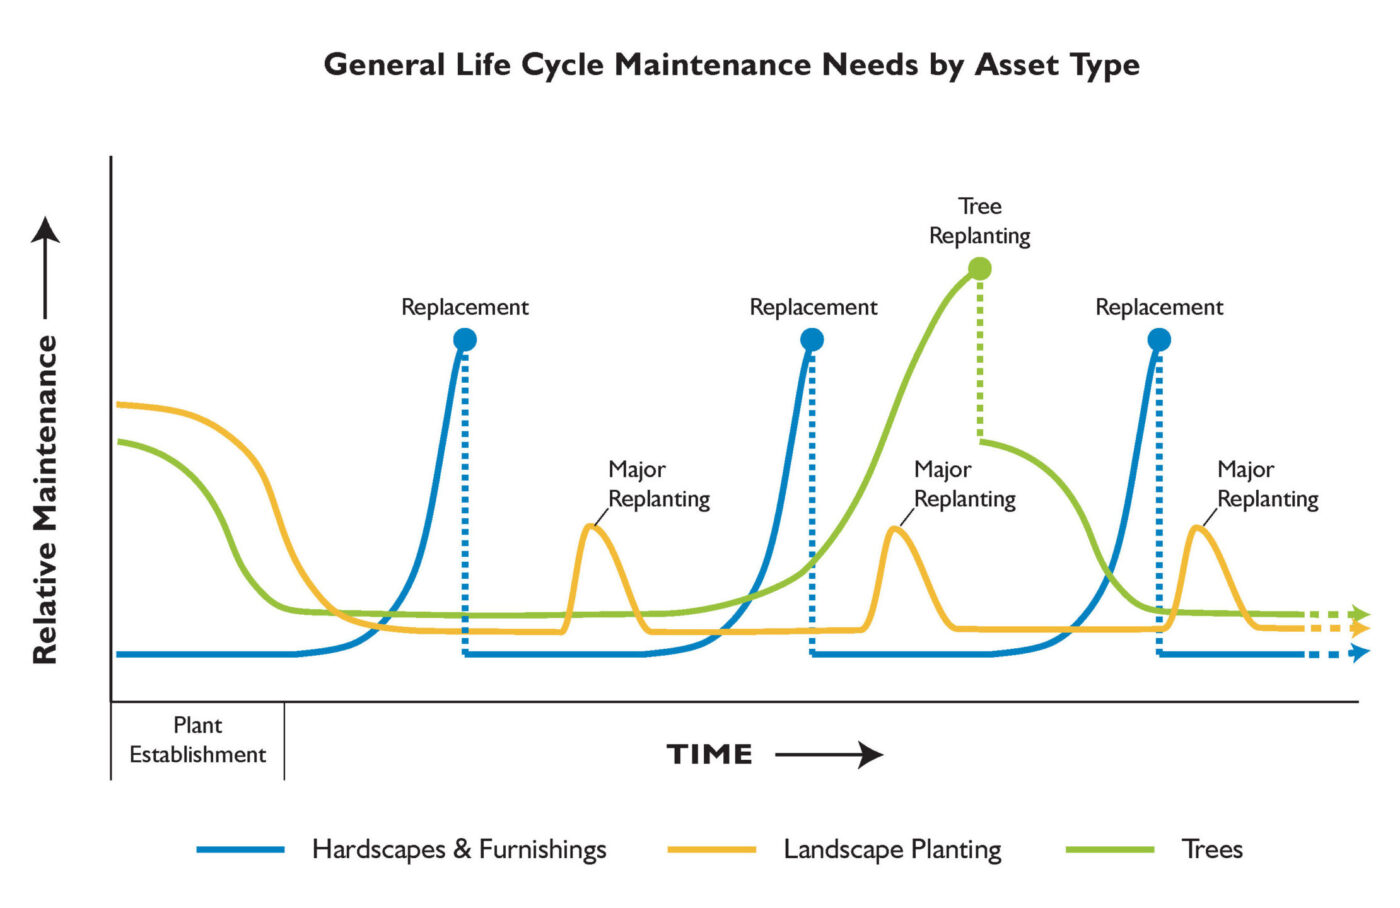 A chart showing how the maintenance needs of assets change over time/the life cycle of the asset.